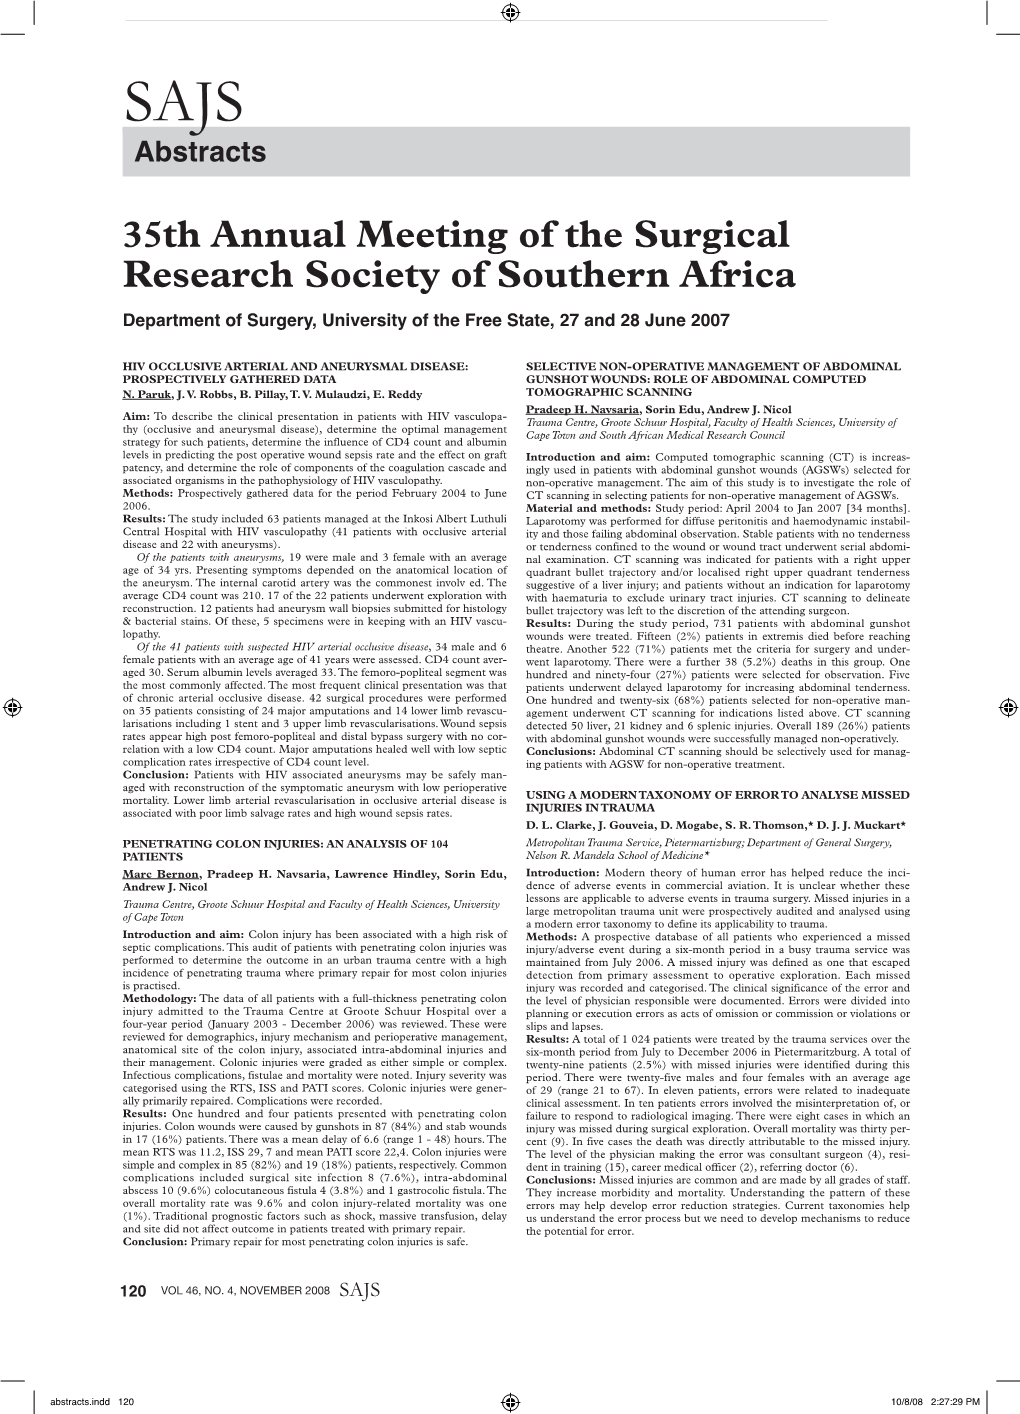 35Th Annual Meeting of the Surgical Research Society of Southern Africa